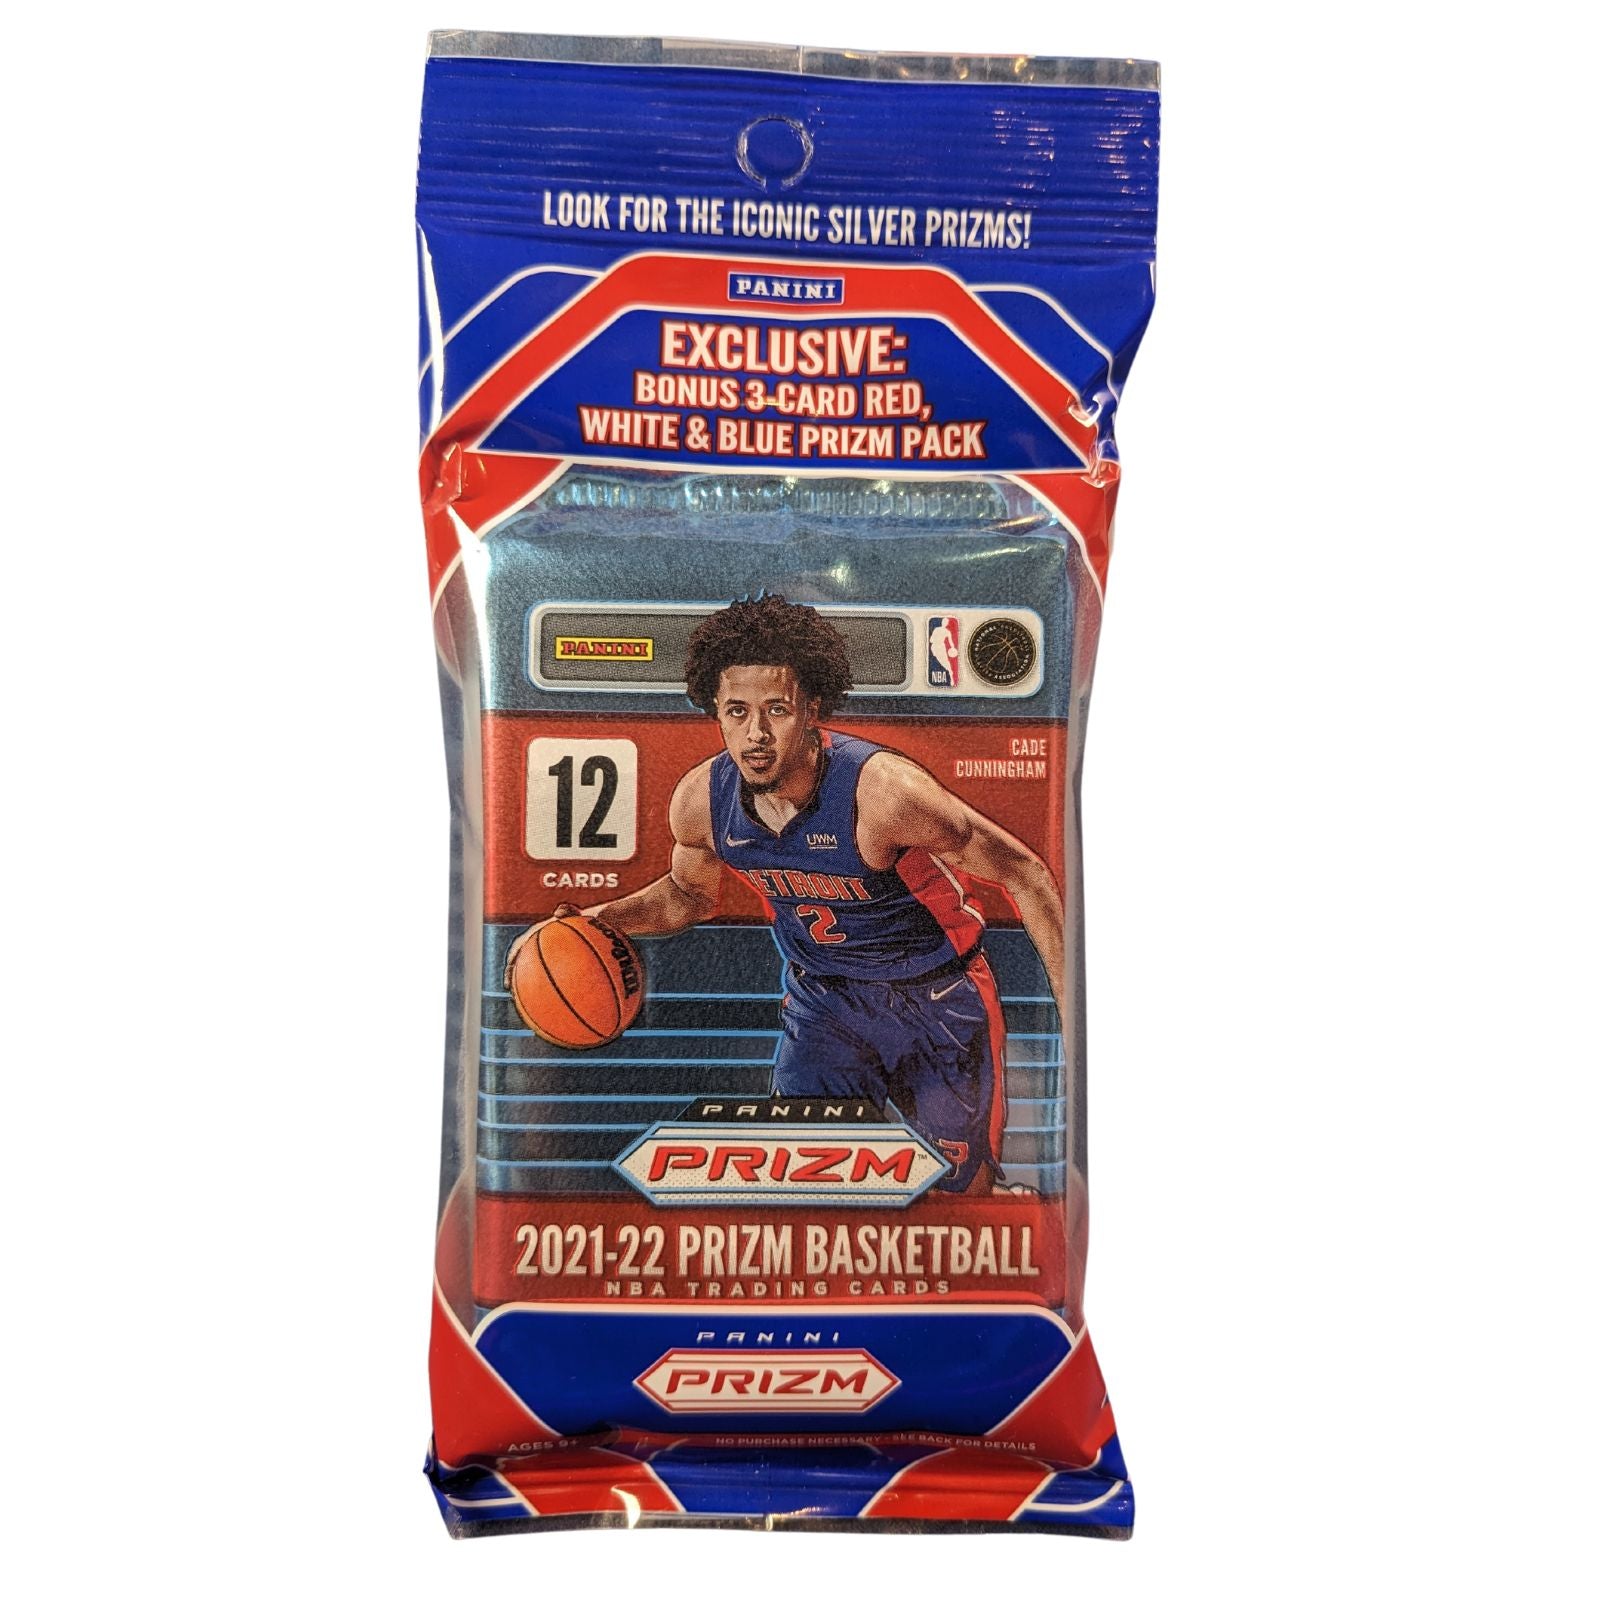 Cello Pack of Prizm Basketball 21-22